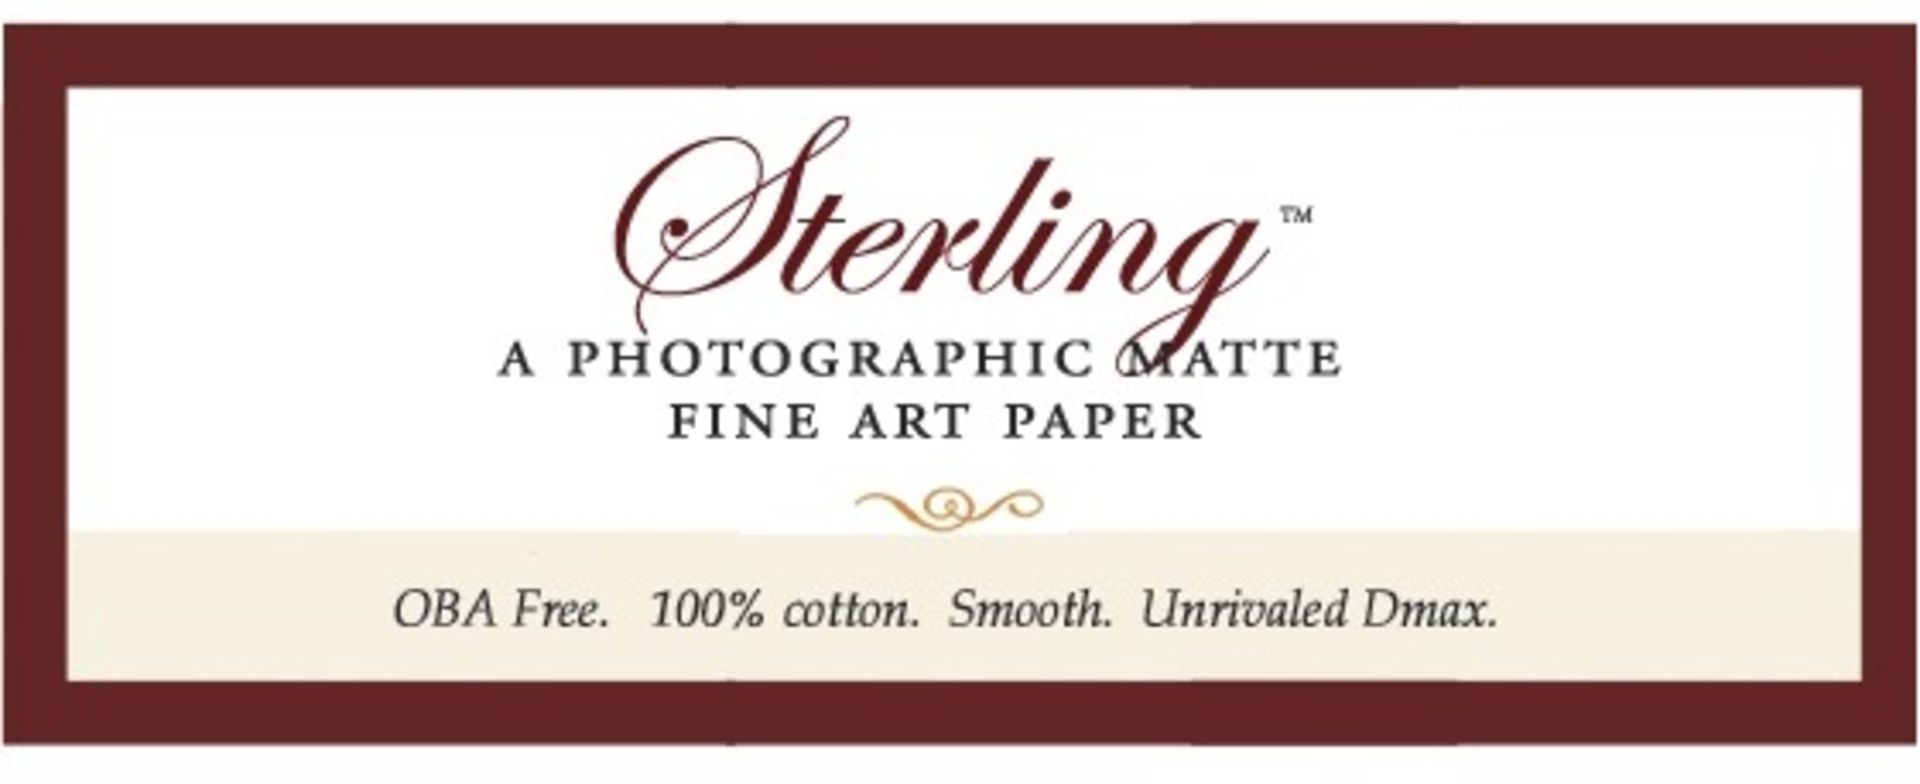 1 x Roll of Breathing Colour STERLING Photographic Matte Fine Art Paper - Size 17" x 50' - - Image 5 of 5